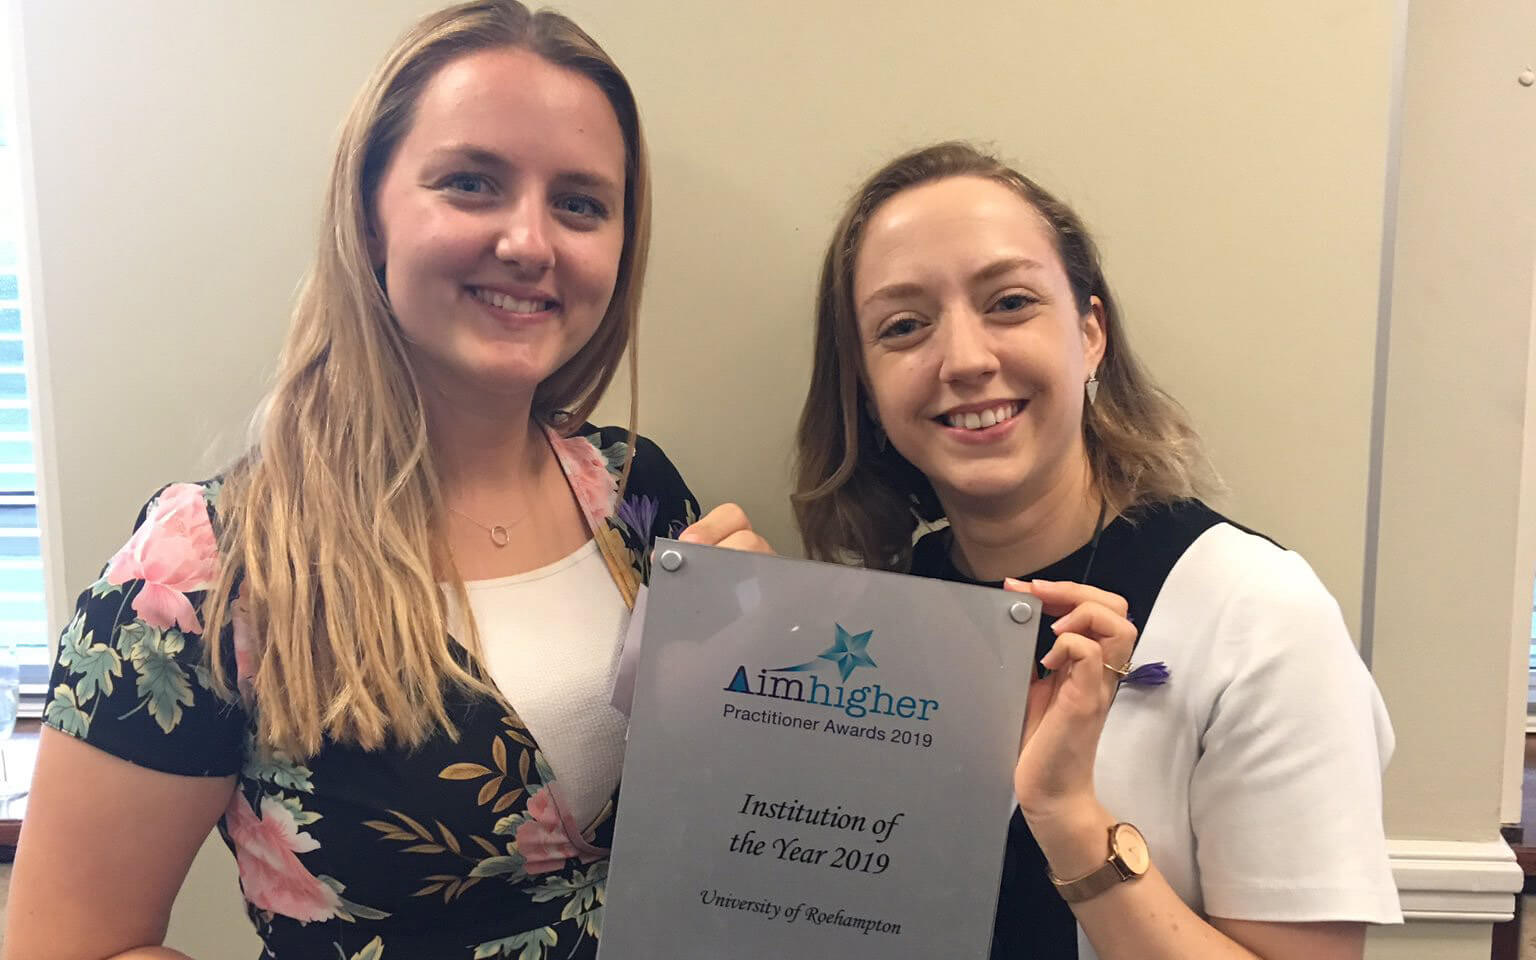 Image - Roehampton wins Institution of the Year at AimHigher London Practitioner Awards